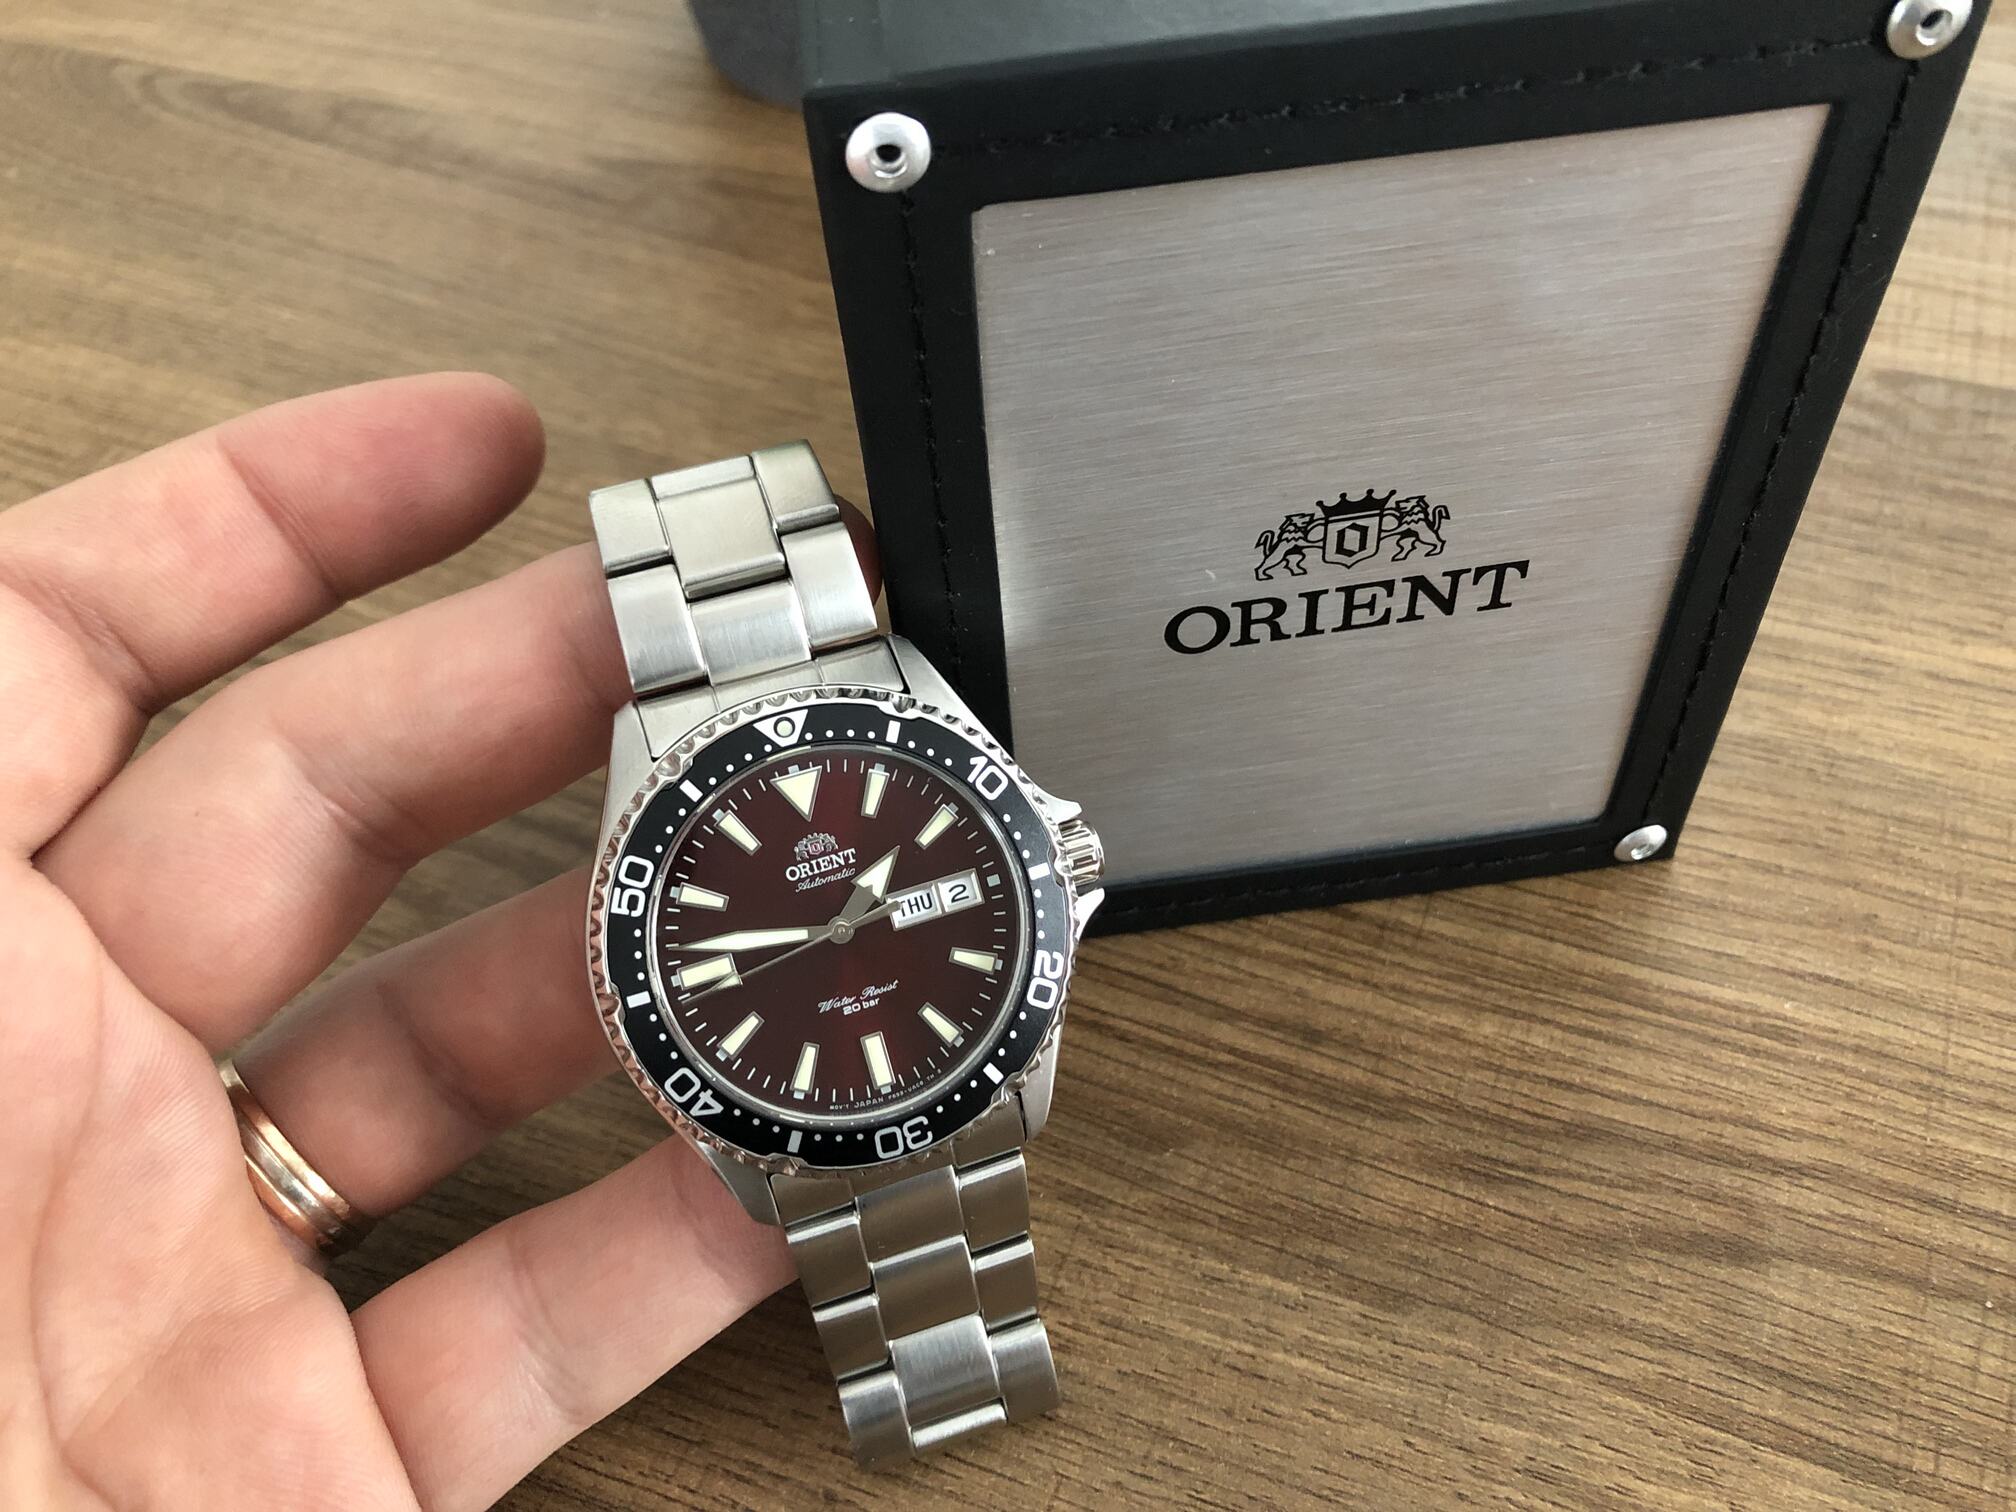 Orient dive watch with a box next to it